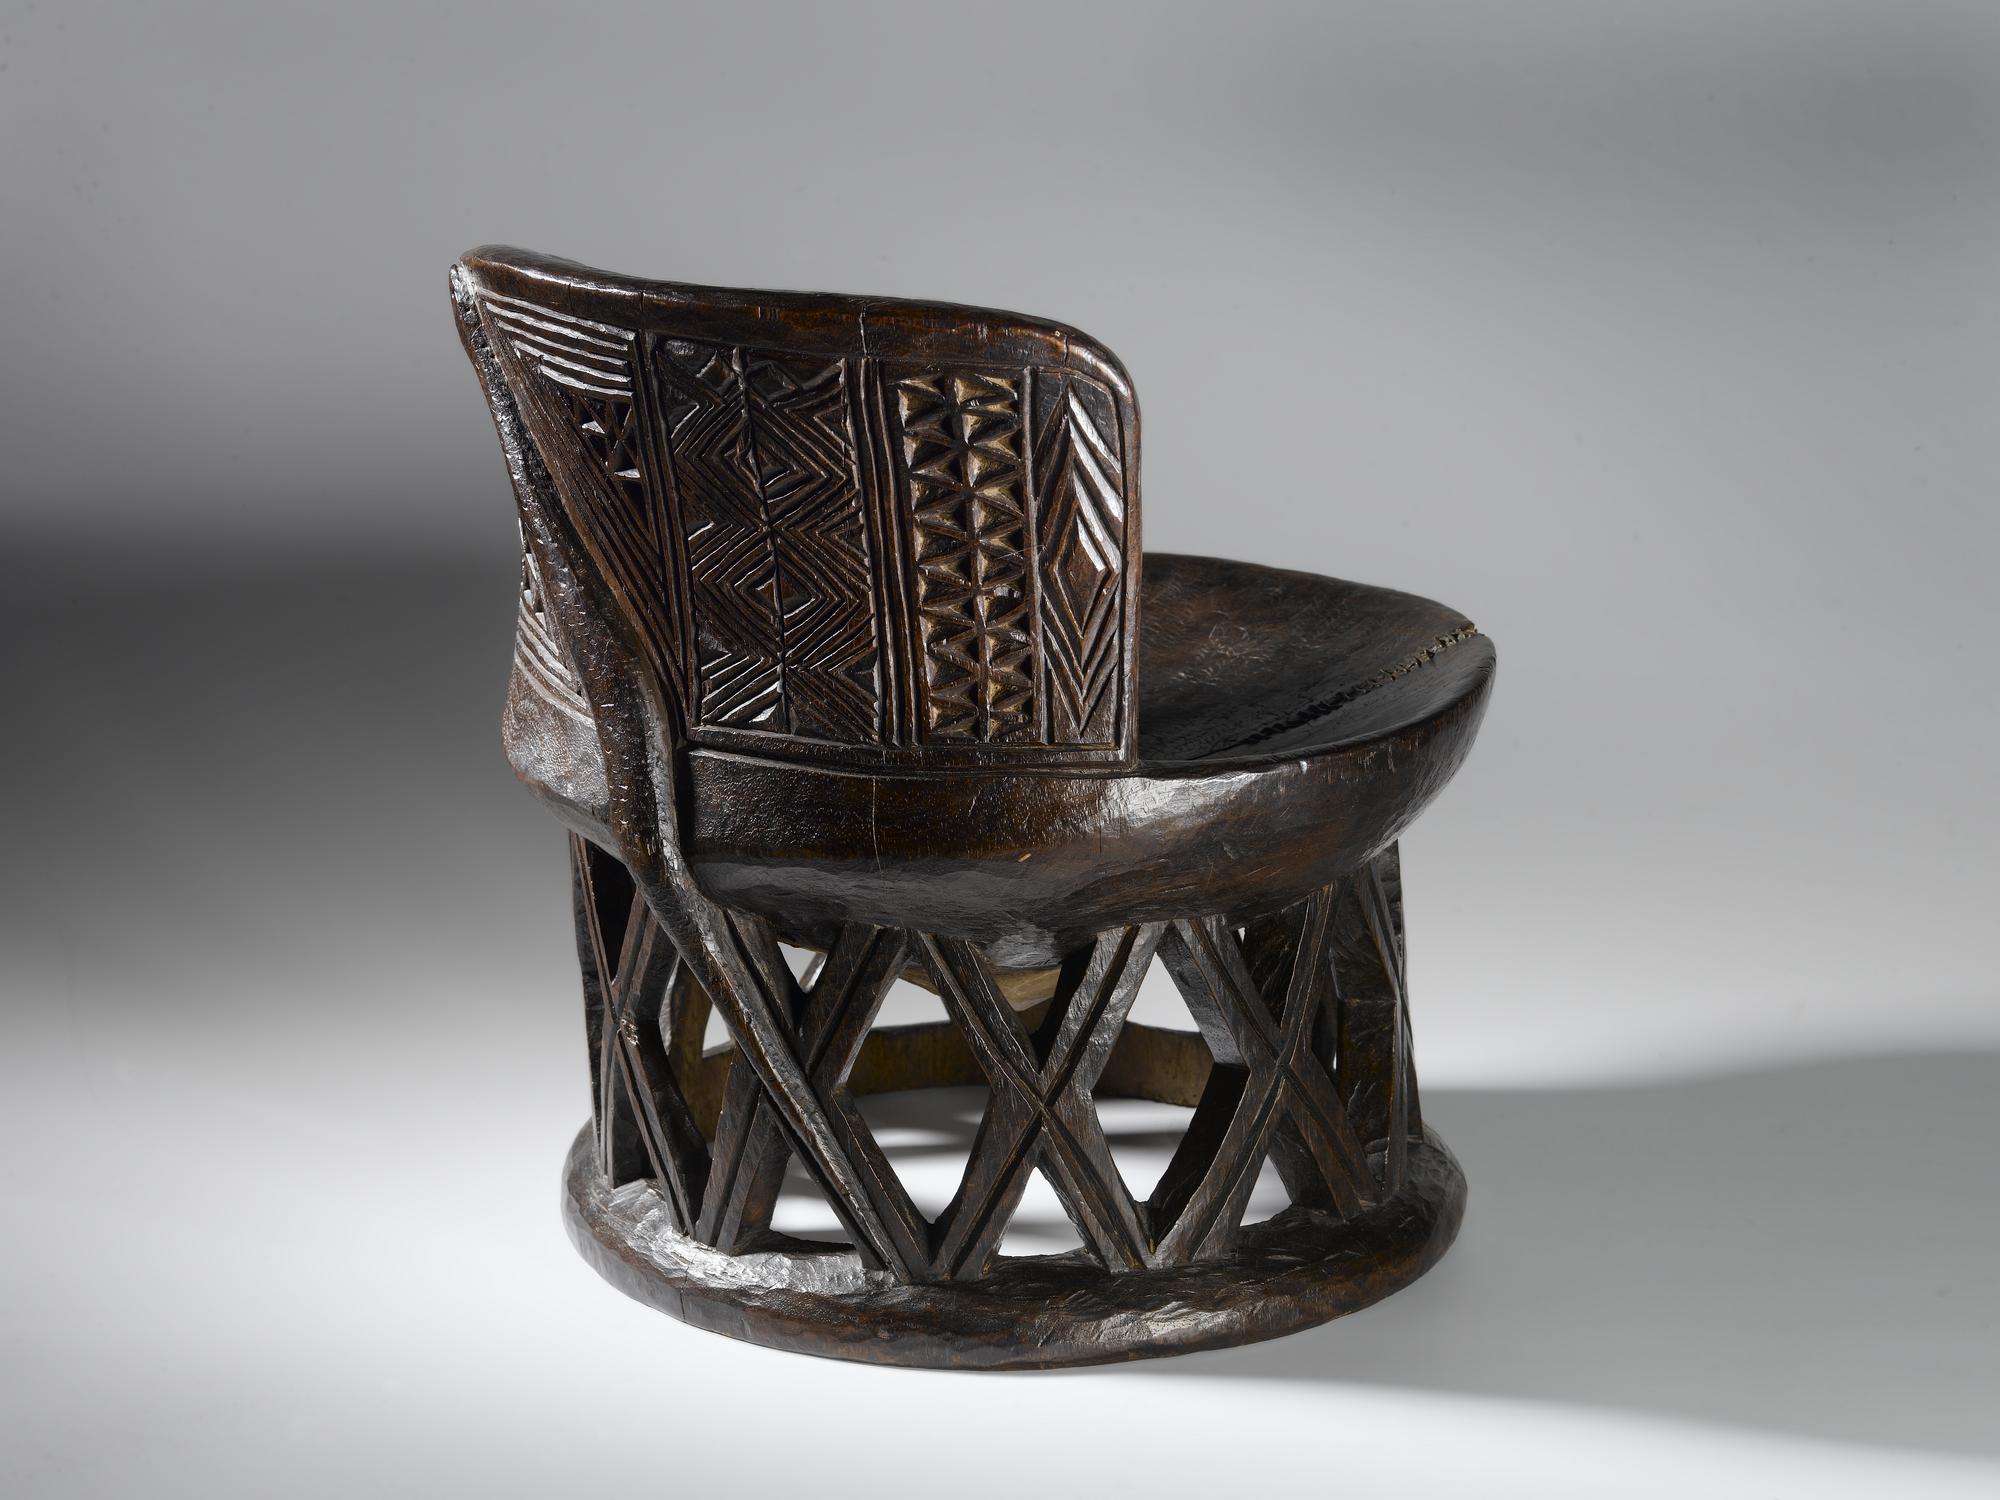 Circular wooden stool with wire repair on seat, curved back and open lattice-work base, carved geometric patterns on seat back and serpent carved on back of stool from top to base: Africa, Central Africa, Democratic Republic of the Congo, Tanganyika Plateau, Bemba people, late 19th century.